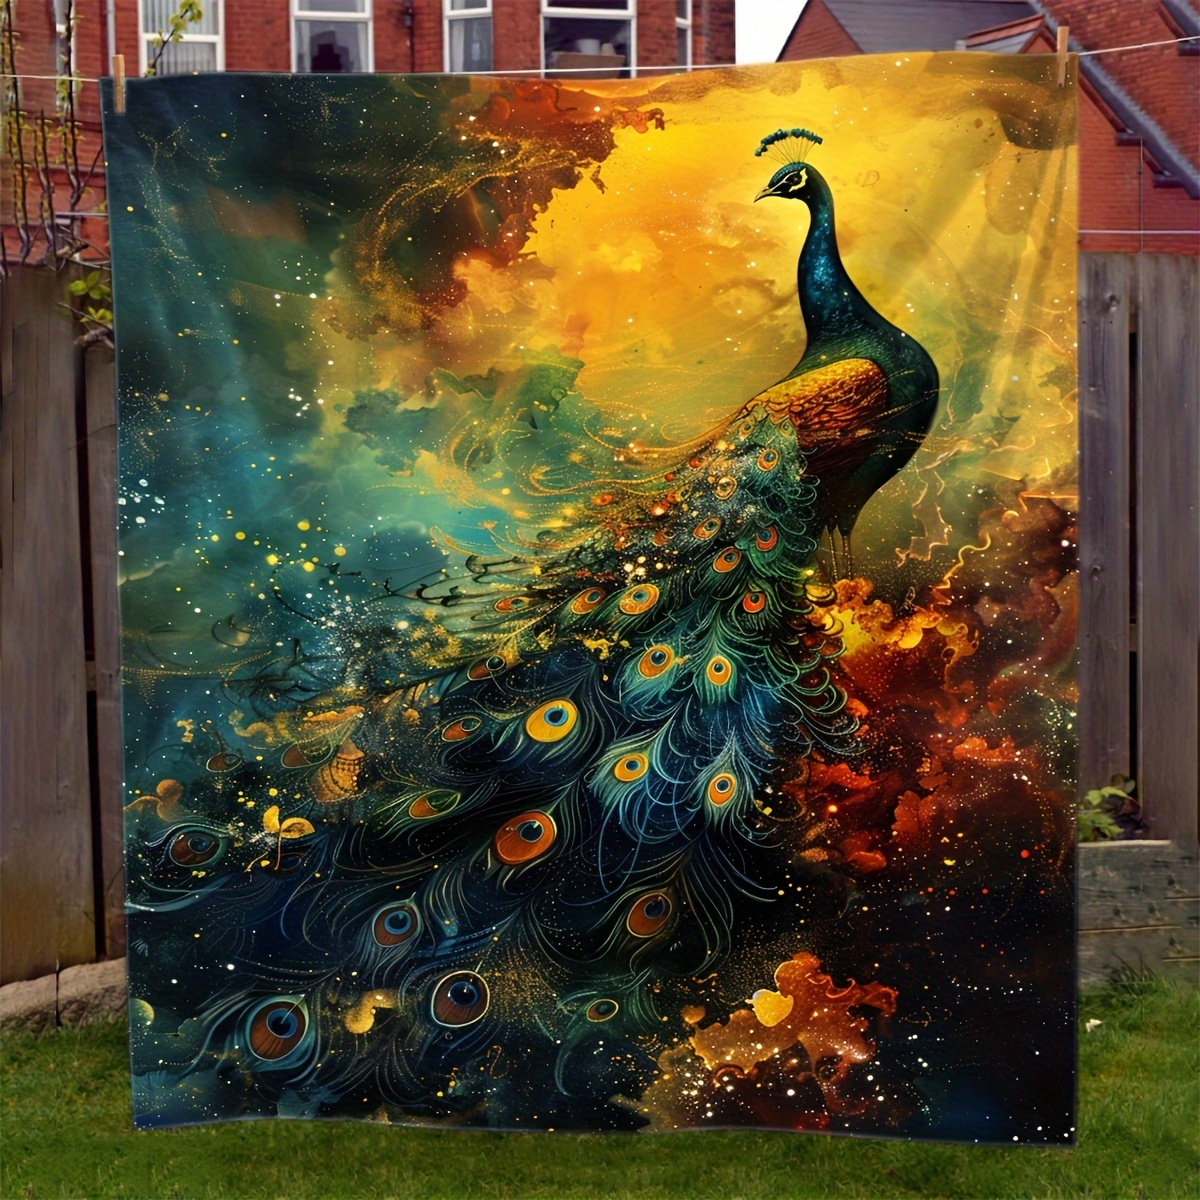 

1pc Gifts Blanket For Animal Fans Aesthetic Luxury Peacock Soft Blanket Flannel Blanket For Couch Sofa Office Bed Camping Travel, Multi-purpose Gift Blanket For All Season